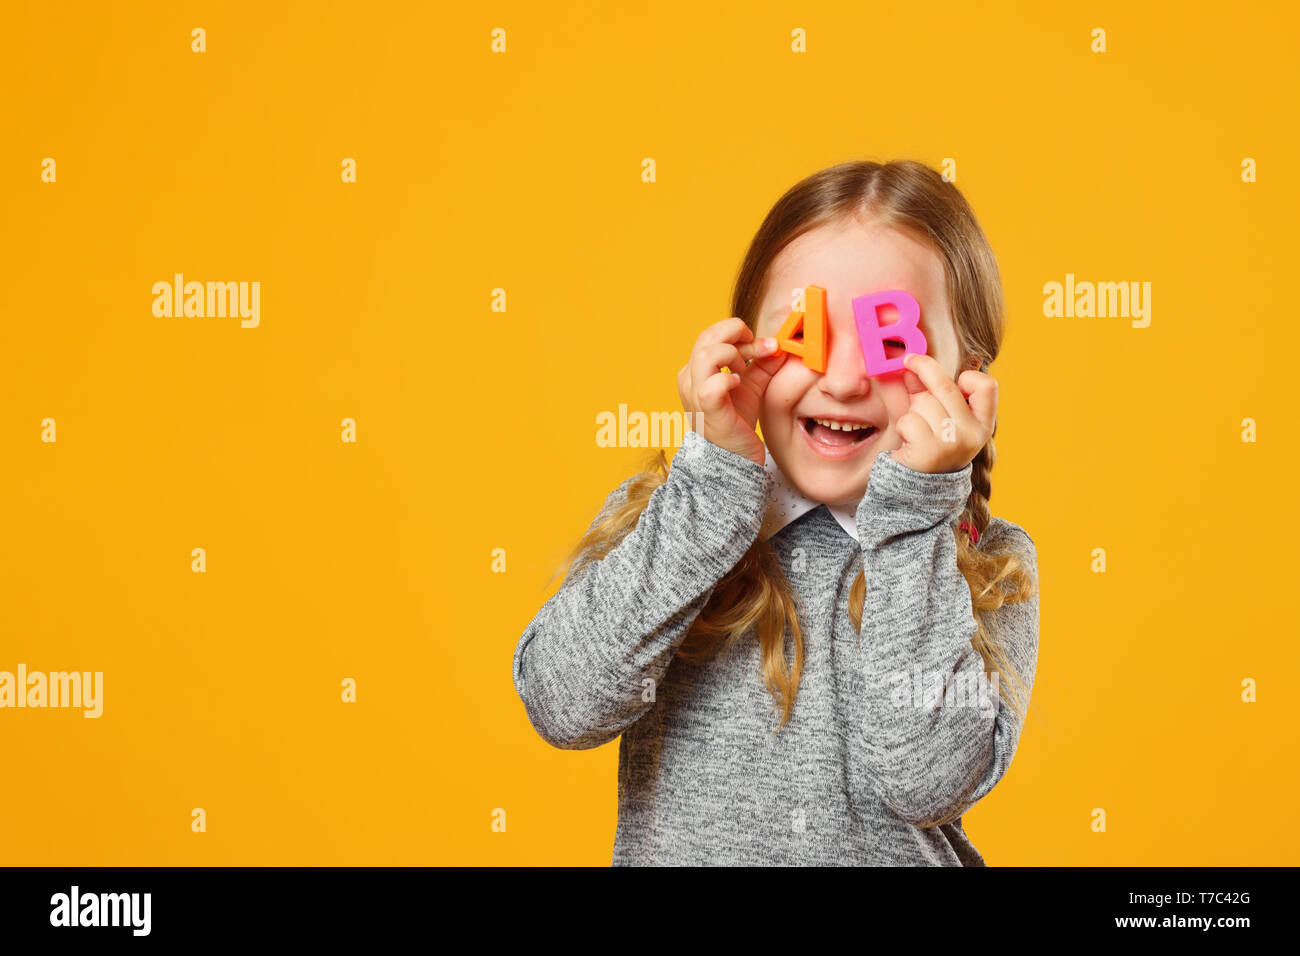 Portrait of a cheerful little girl child on a yellow background. Schoolgirl holds the letters A and B. The concept of education and school. Stock Photo